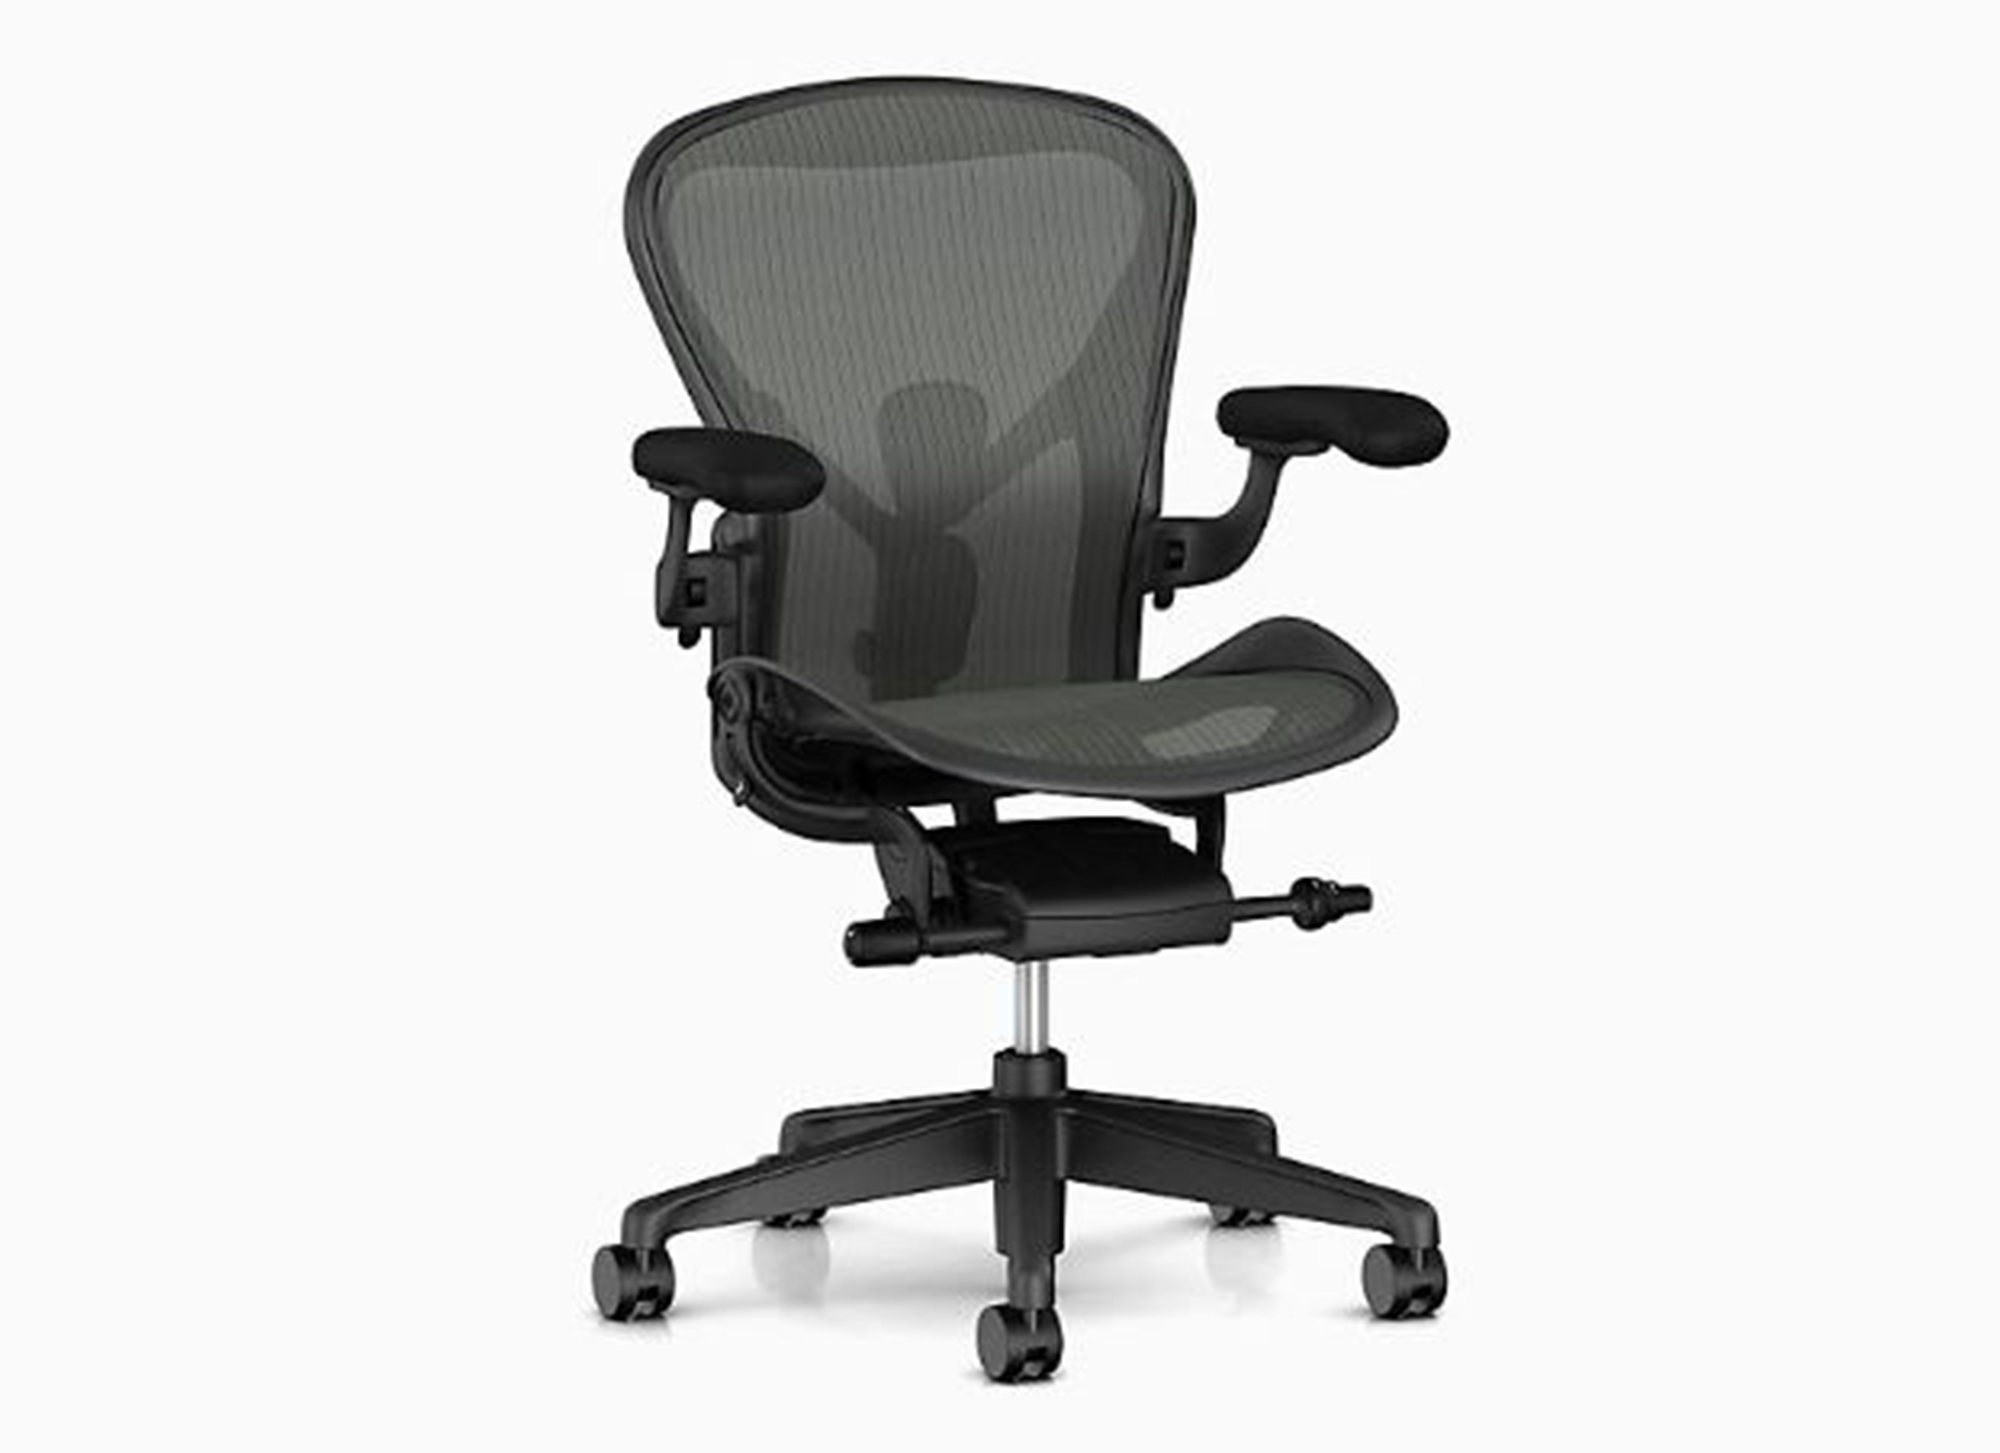 psssst anyone want a wall street trader's used aeron